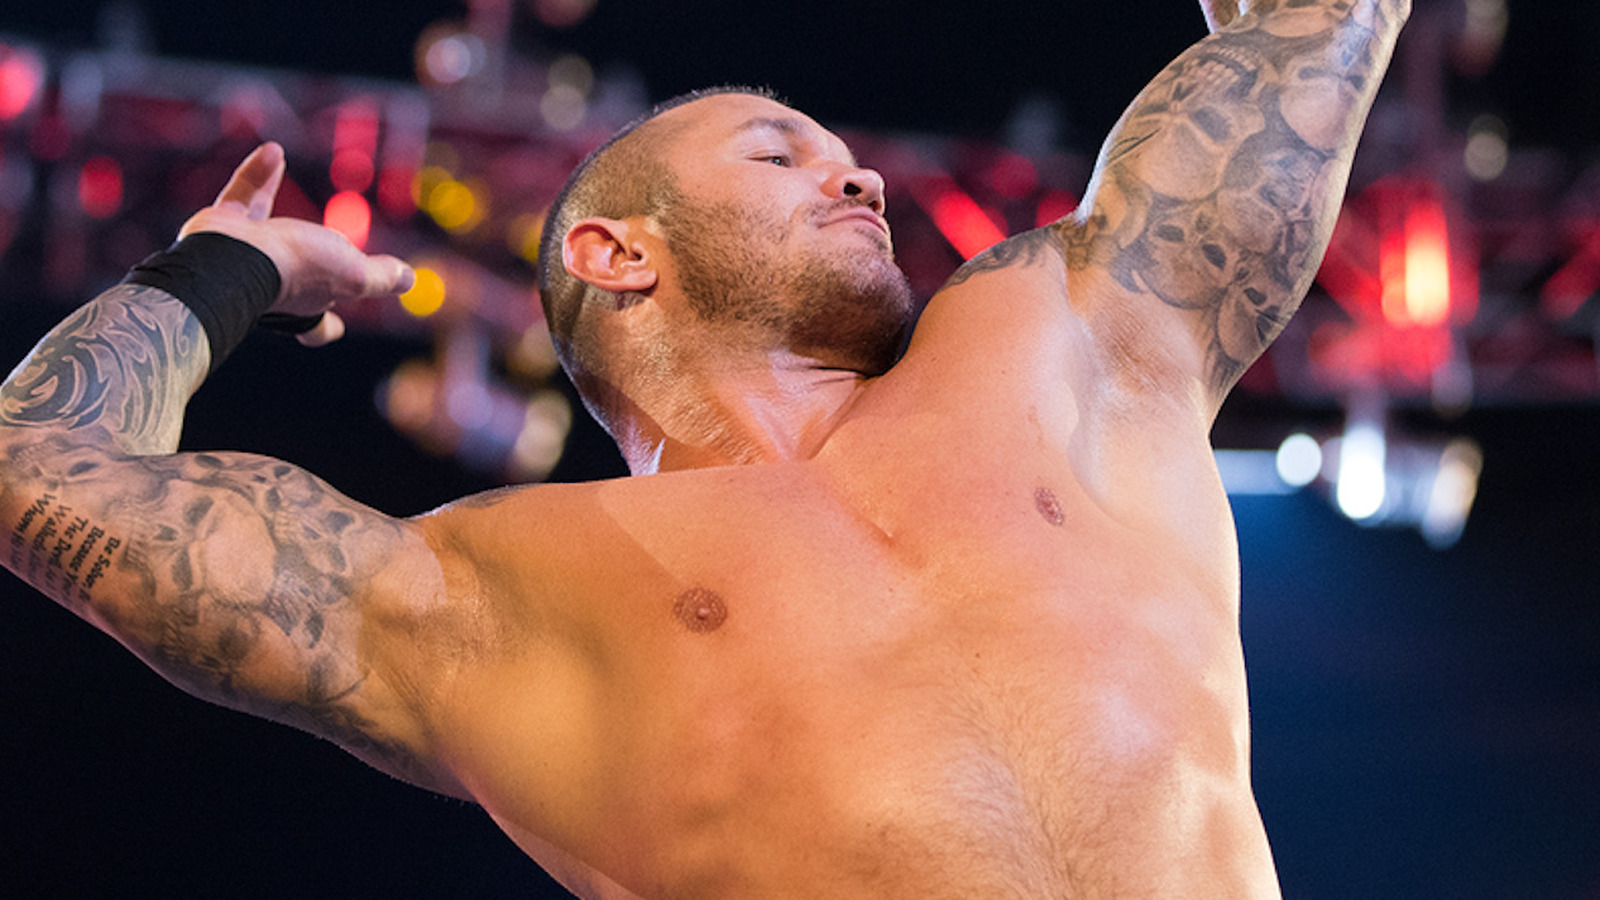 Randy Orton Defeats Sami Zayn To Qualify For Men's Elimination Chamber Match In Perth